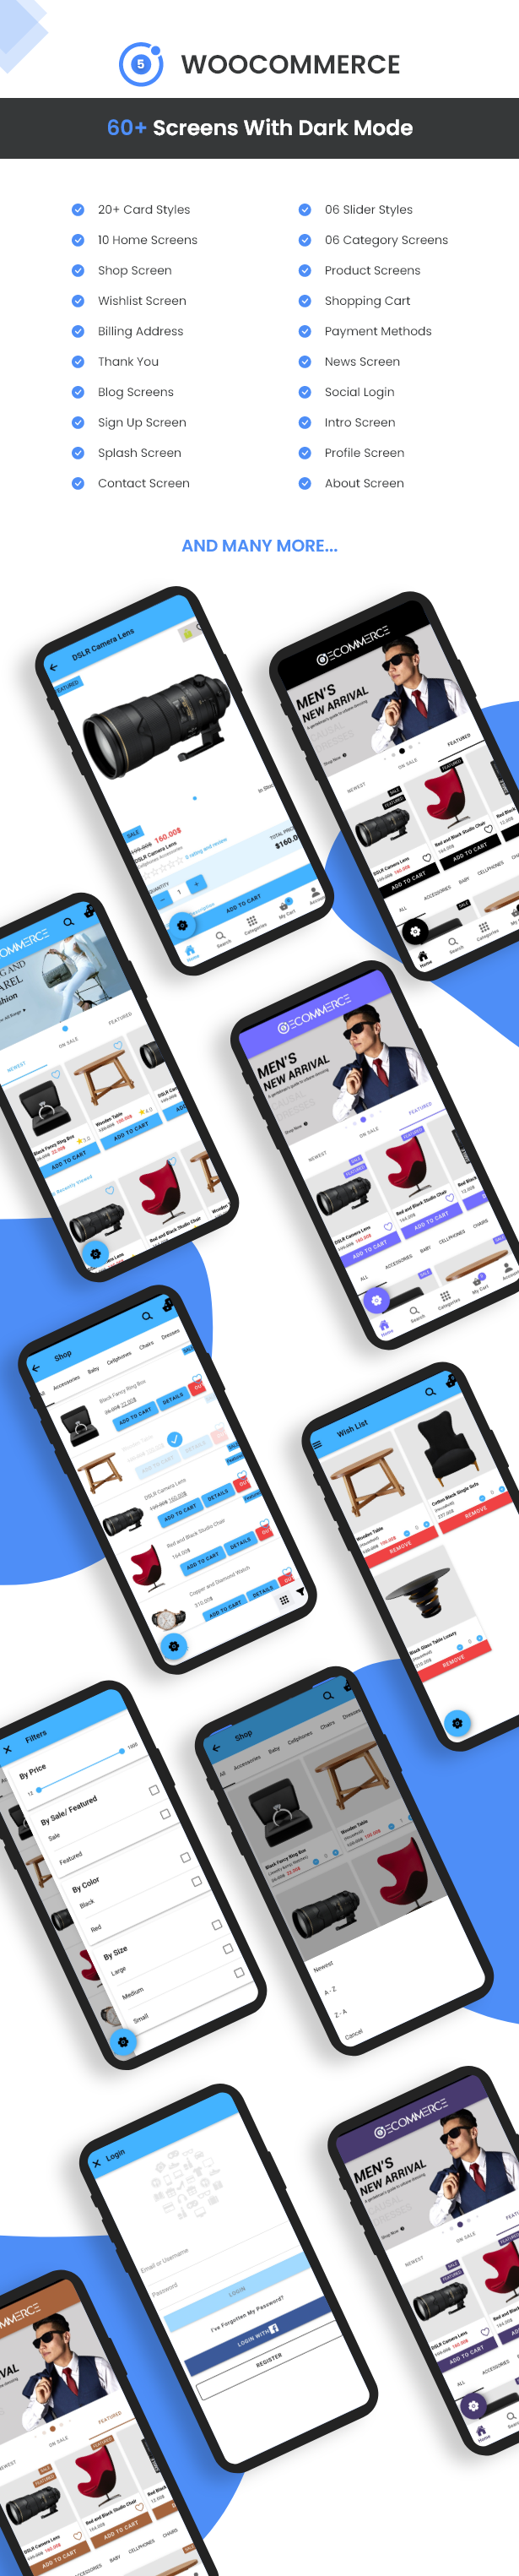 Ionic React Woocommerce - Universal Full Mobile App Solution for iOS & Android / Wordpress Plugins - 10